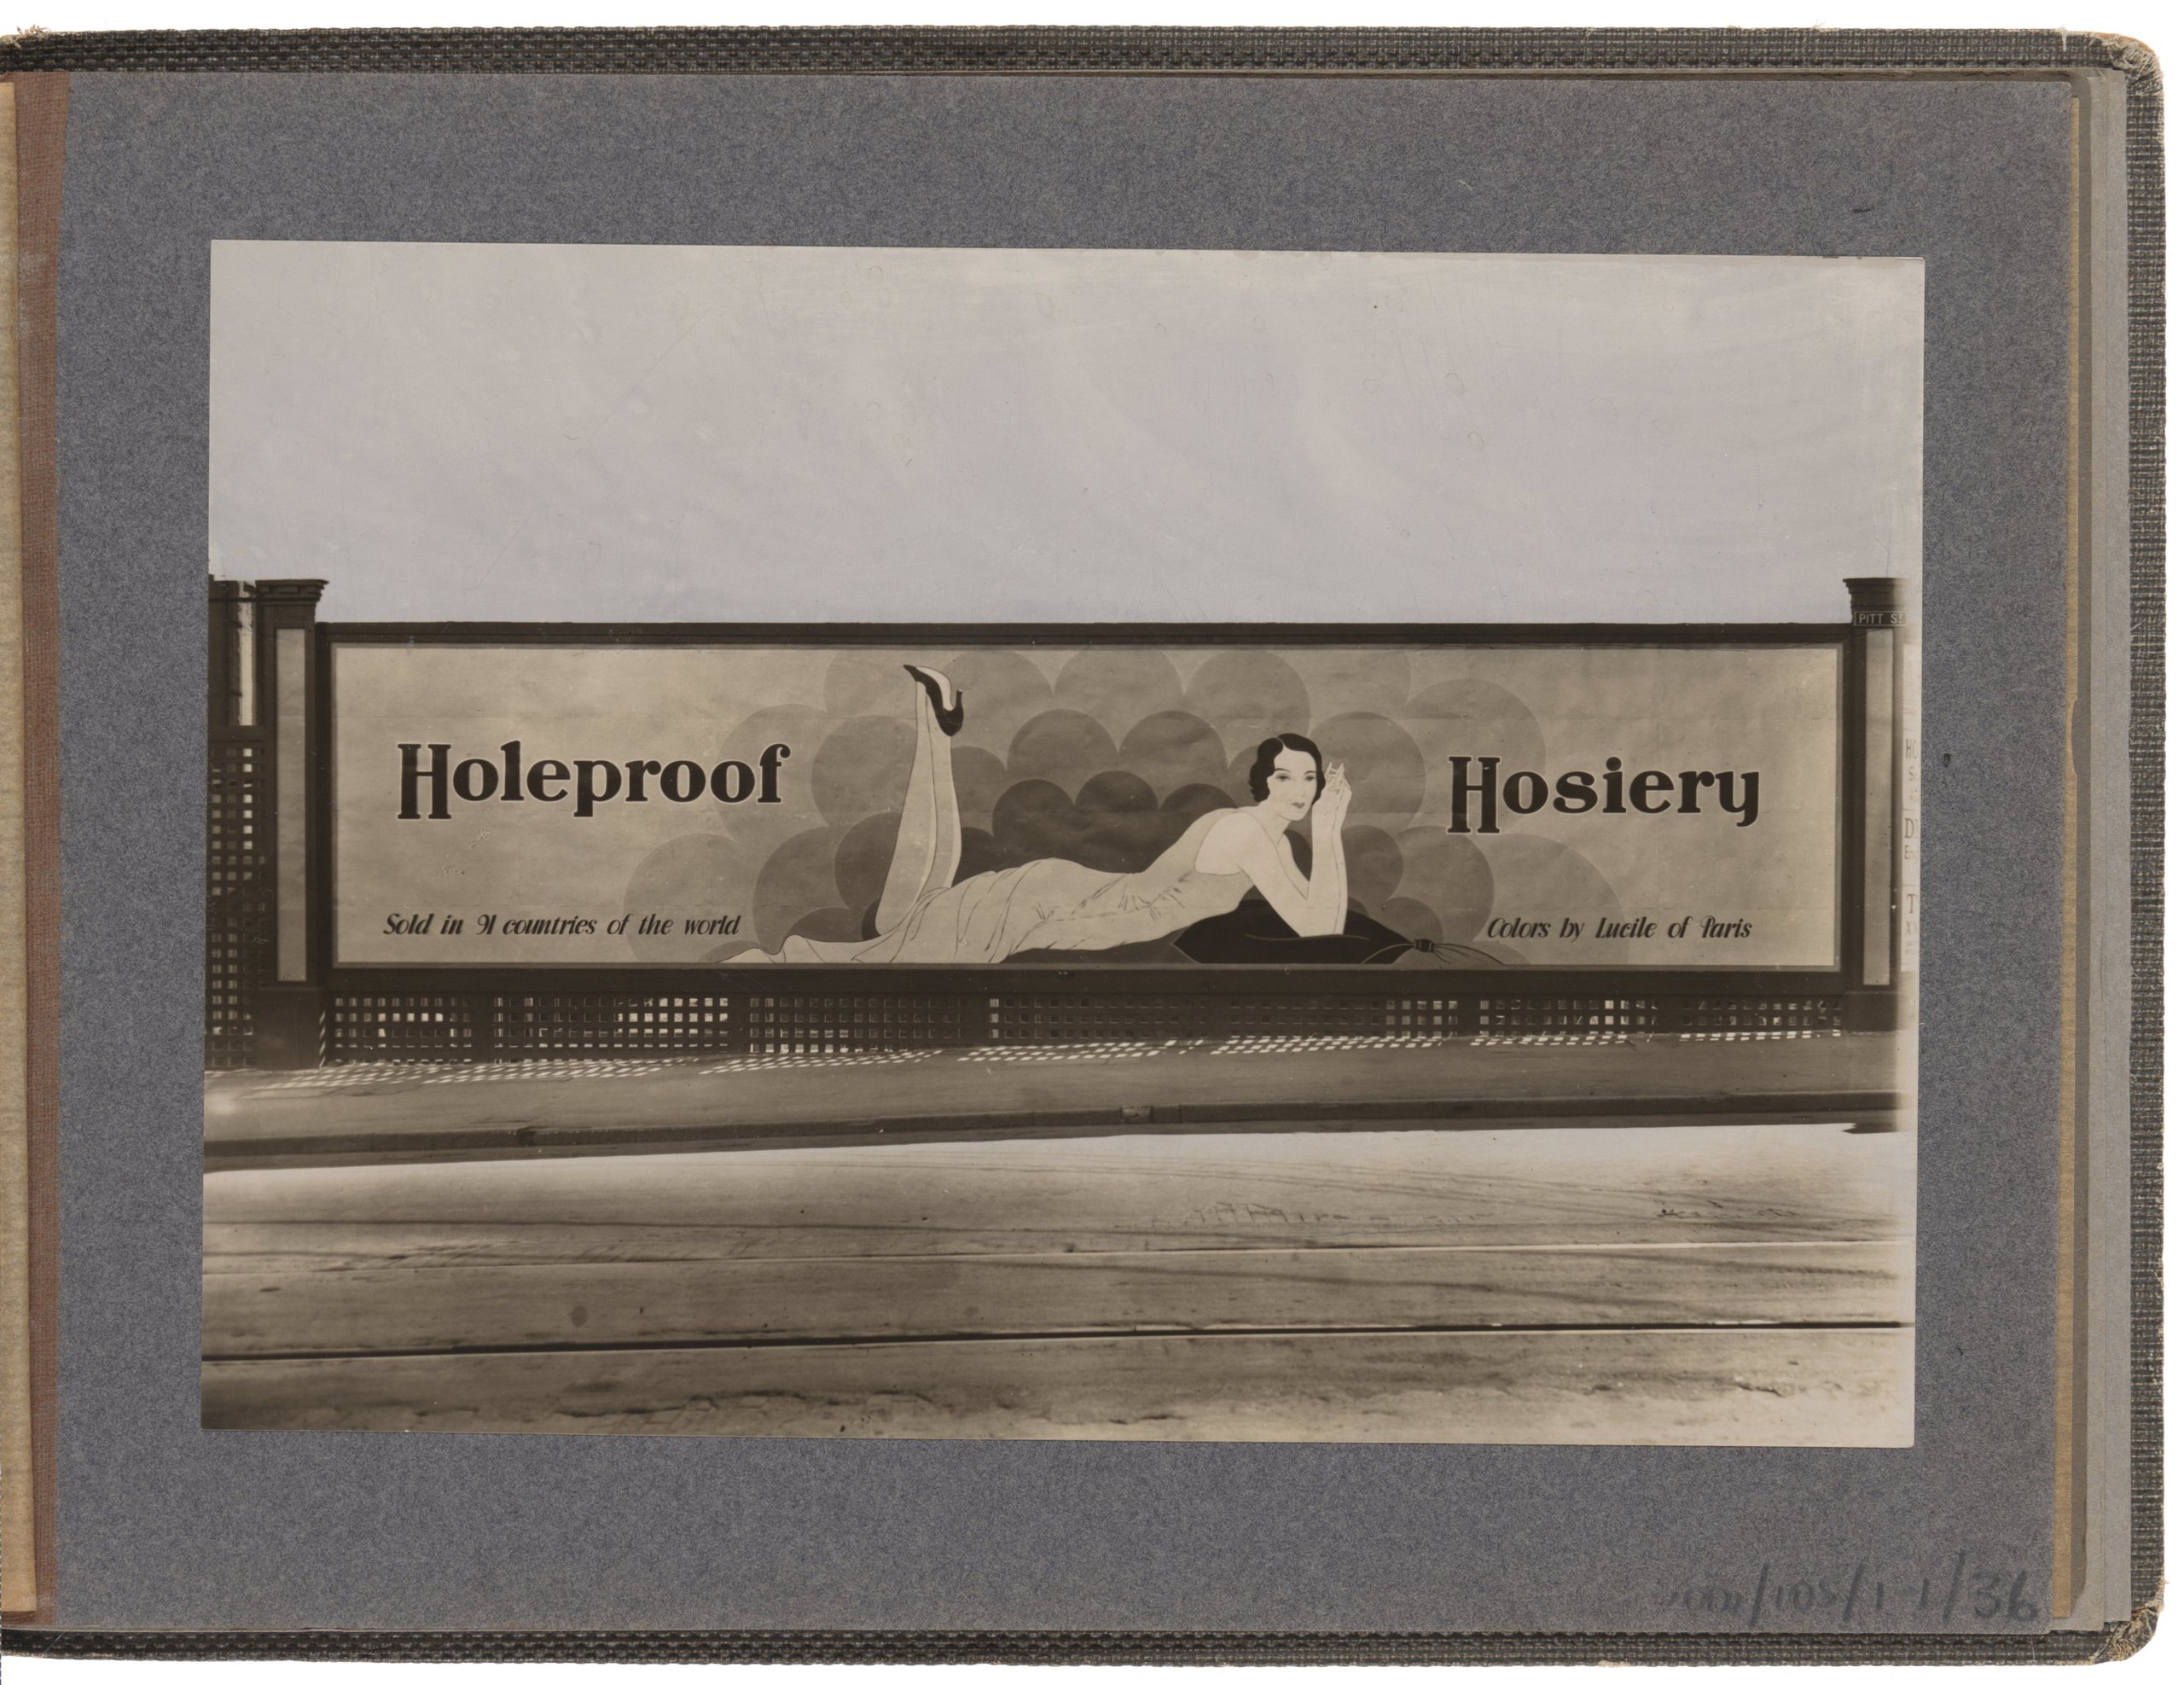 Photograph of roadside wall advertising sign for Holeproof Hosiery